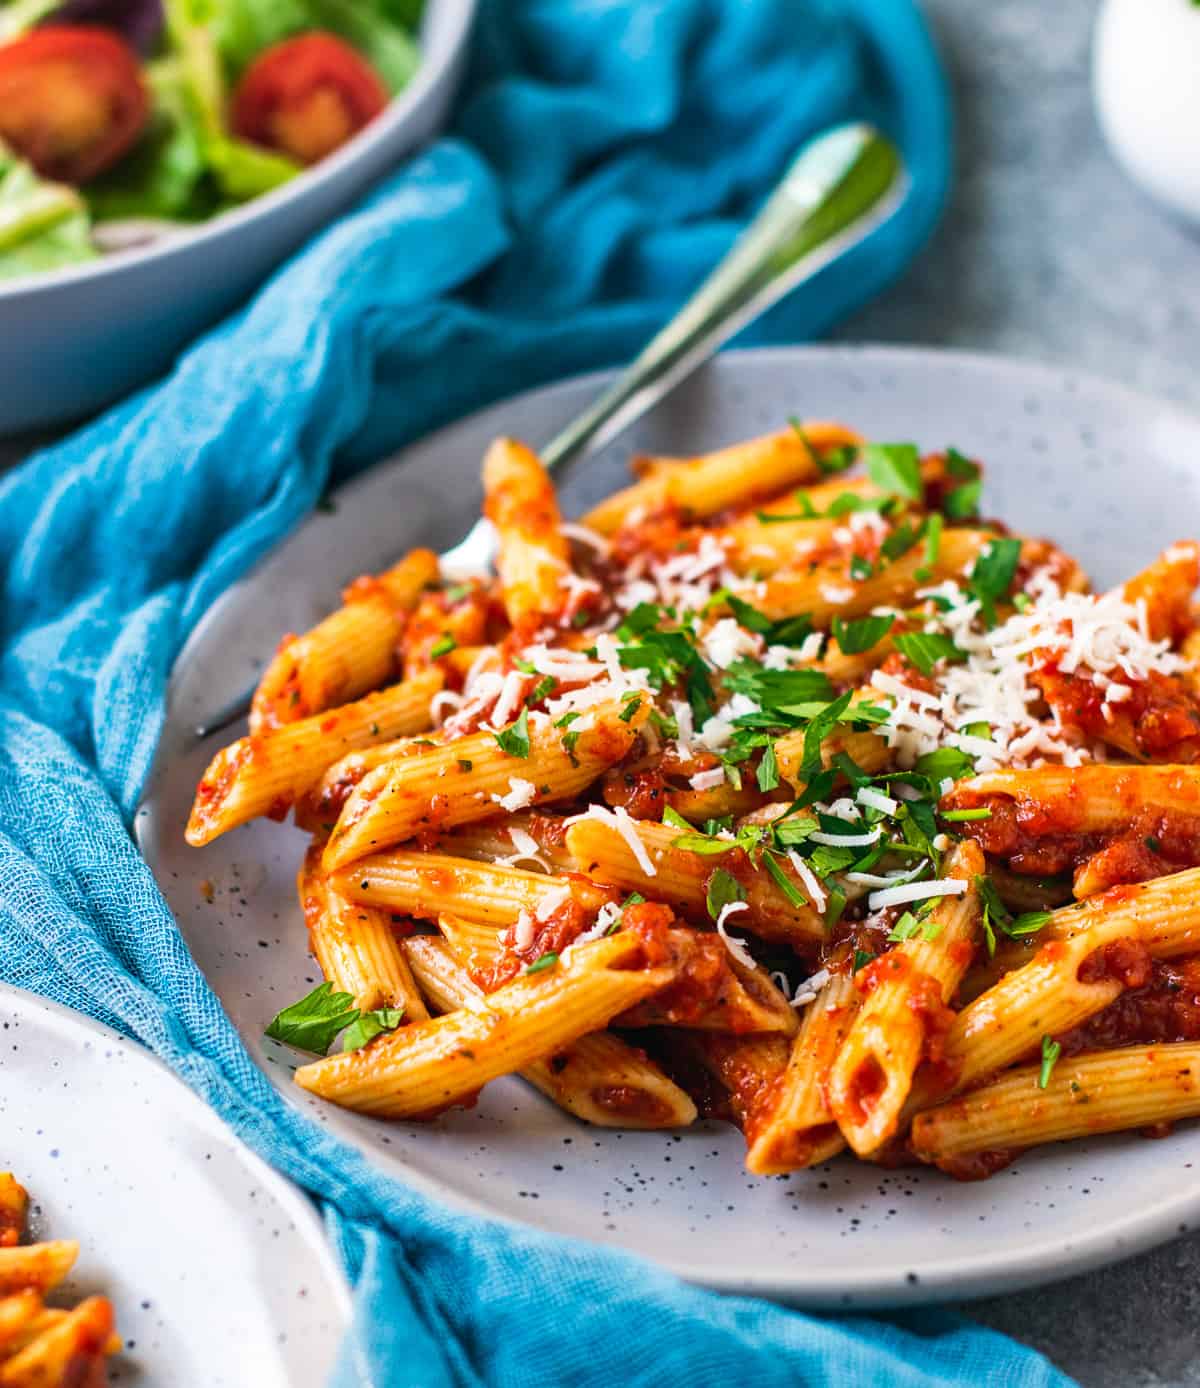 Roasted red pepper pasta sauce tossed with pasta and cheese